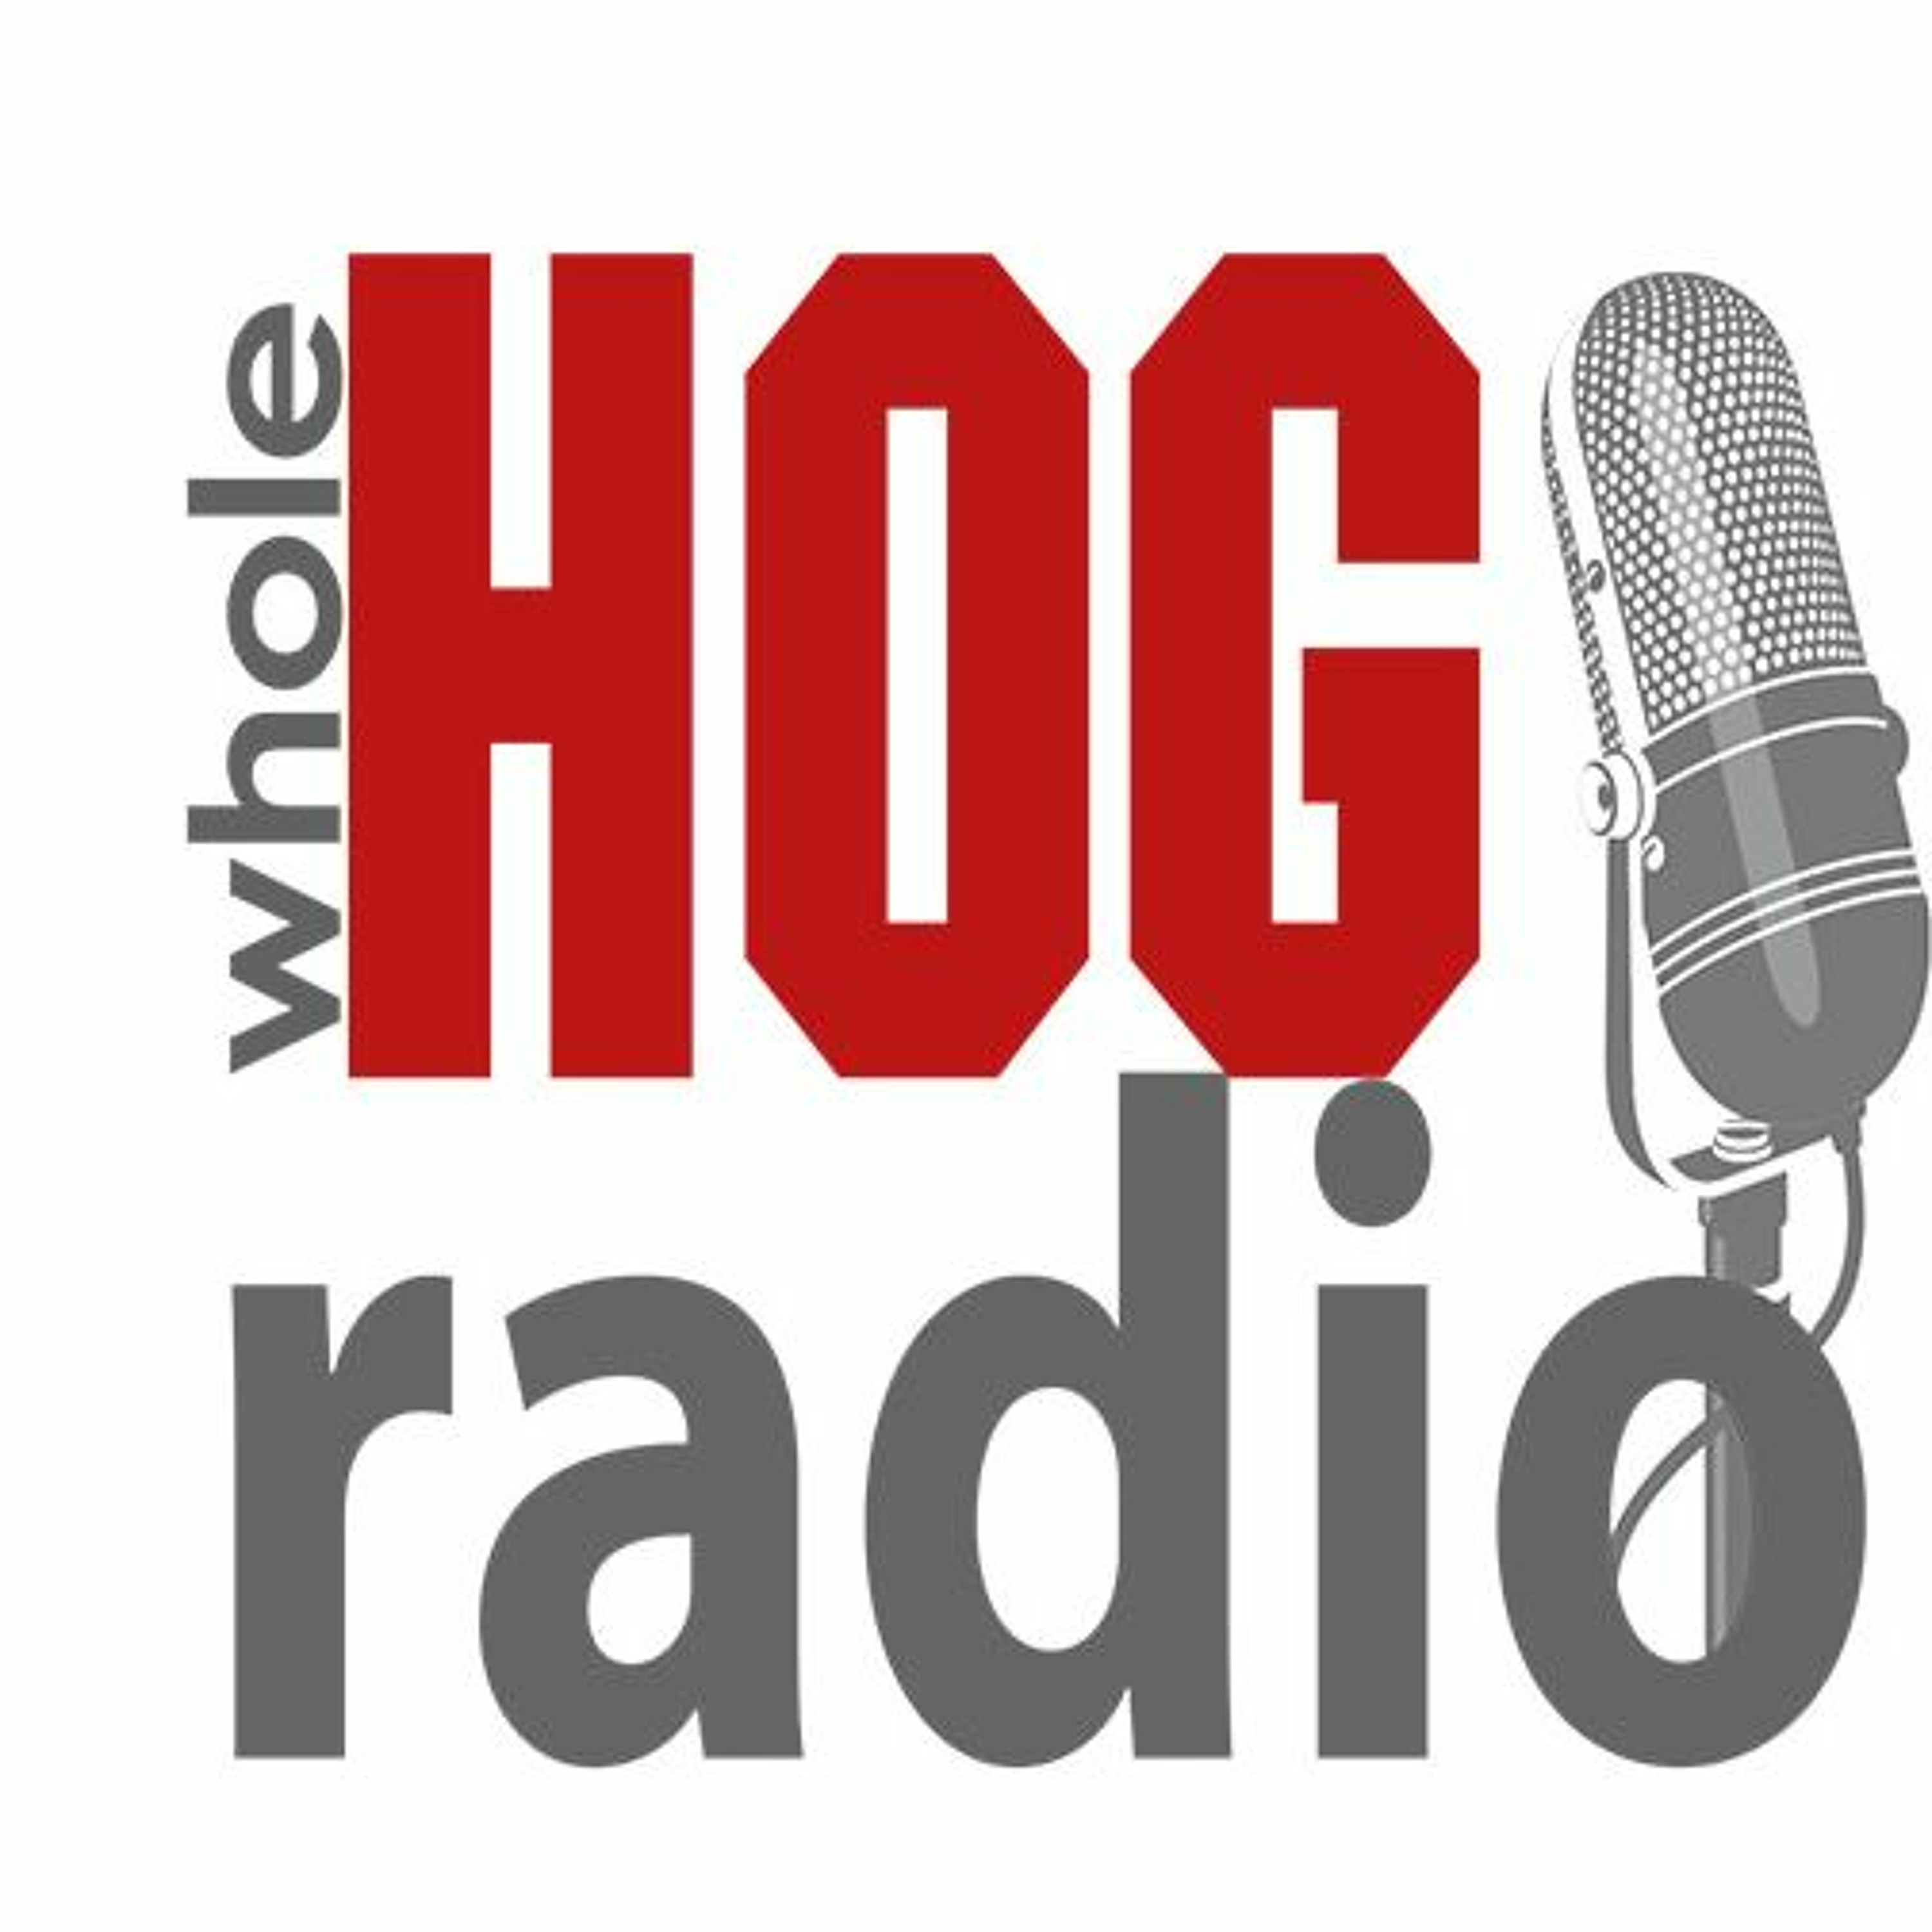 WholeHog Podcast: Best of the decade with Clay Henry